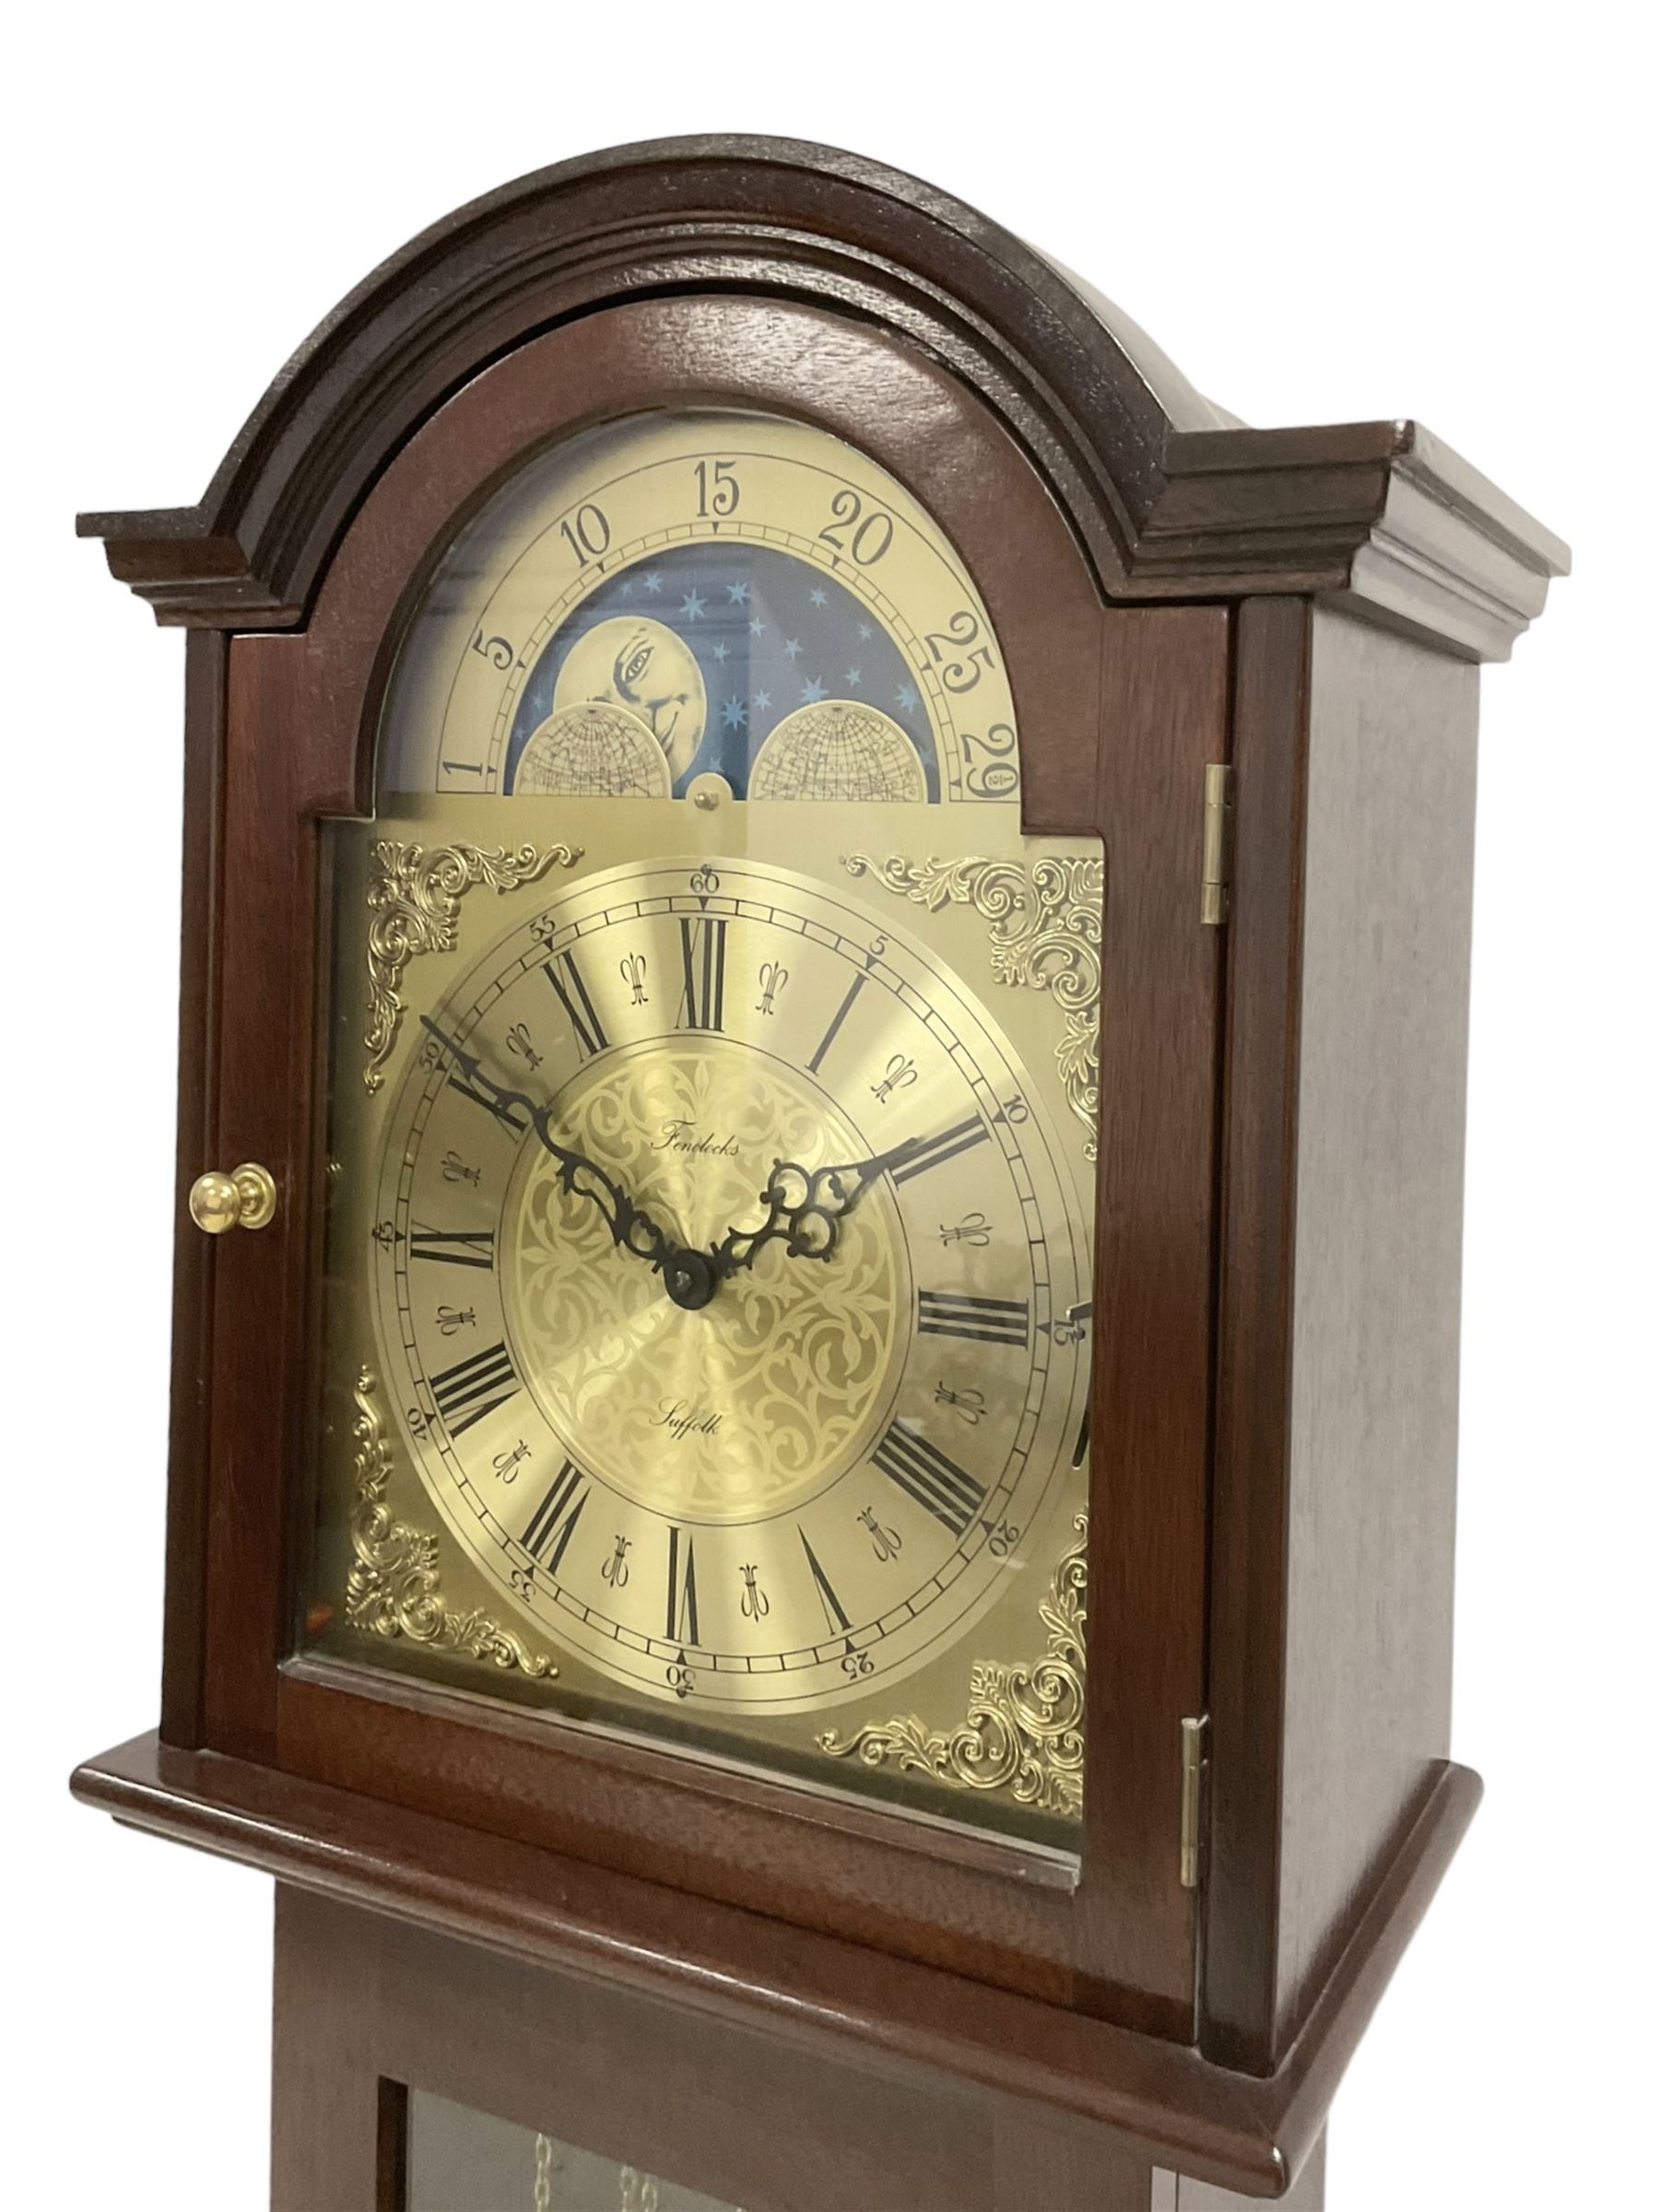 20th century - weight driven 8-day mahogany grandmother clock with a swans neck pediment and fully g - Image 6 of 6